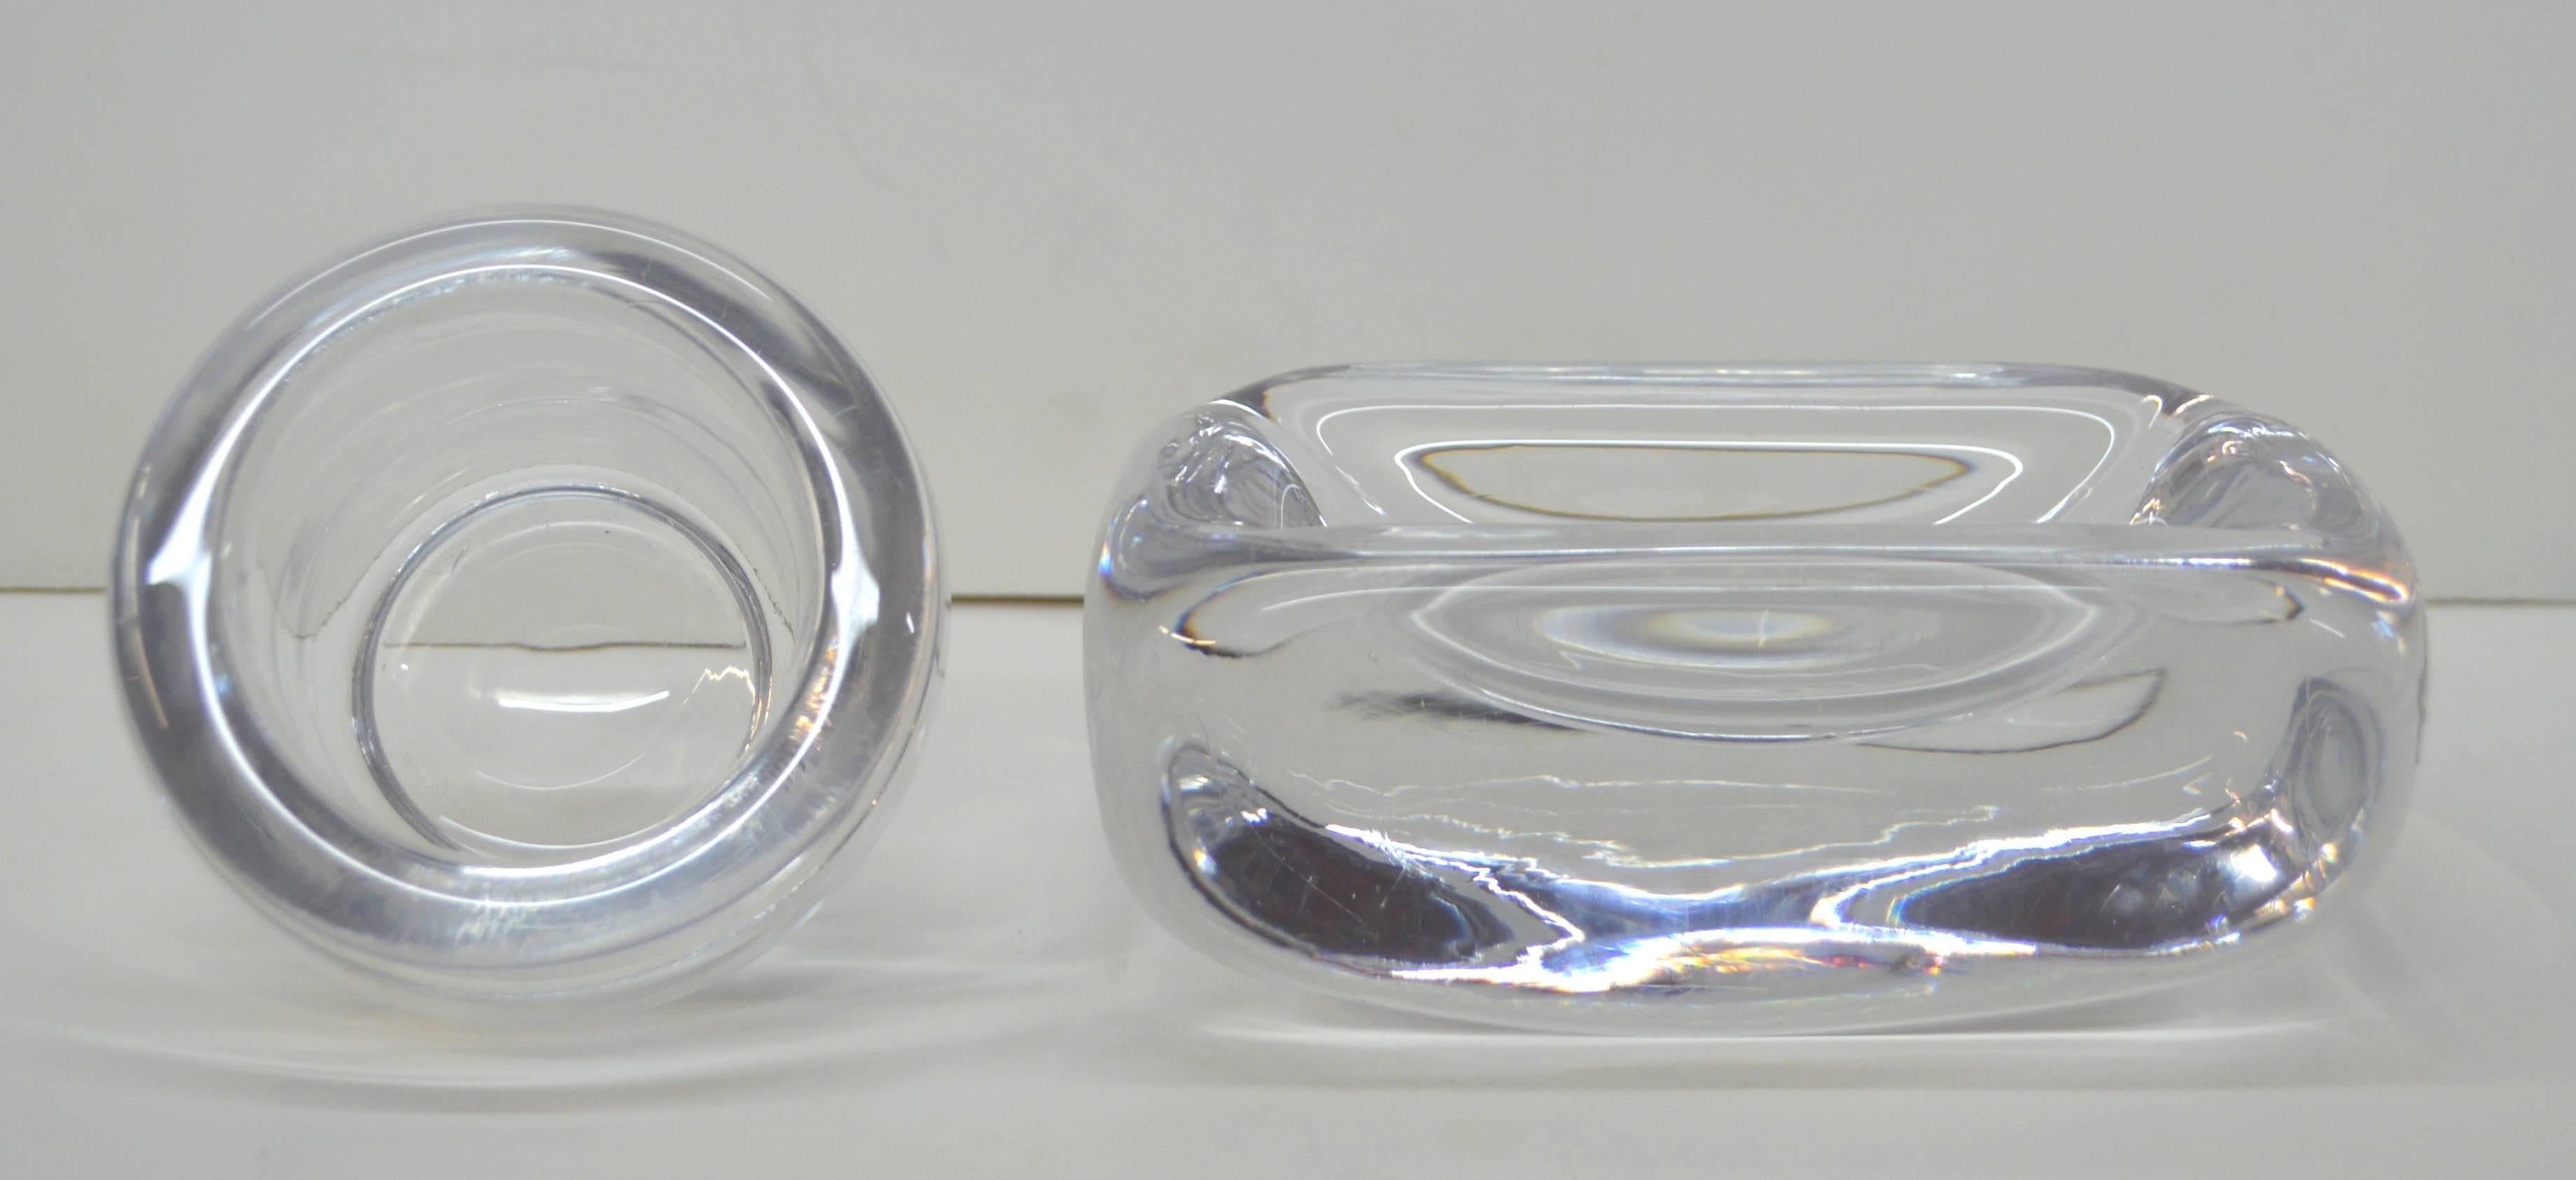 Wonderful pair of Orrefors midcentury clear glass cache tray/candy bowl/ashtray and votice/cup designed by Vicke Lindstrand (Swedish, 1904-1983), 1957. Each piece engraved 